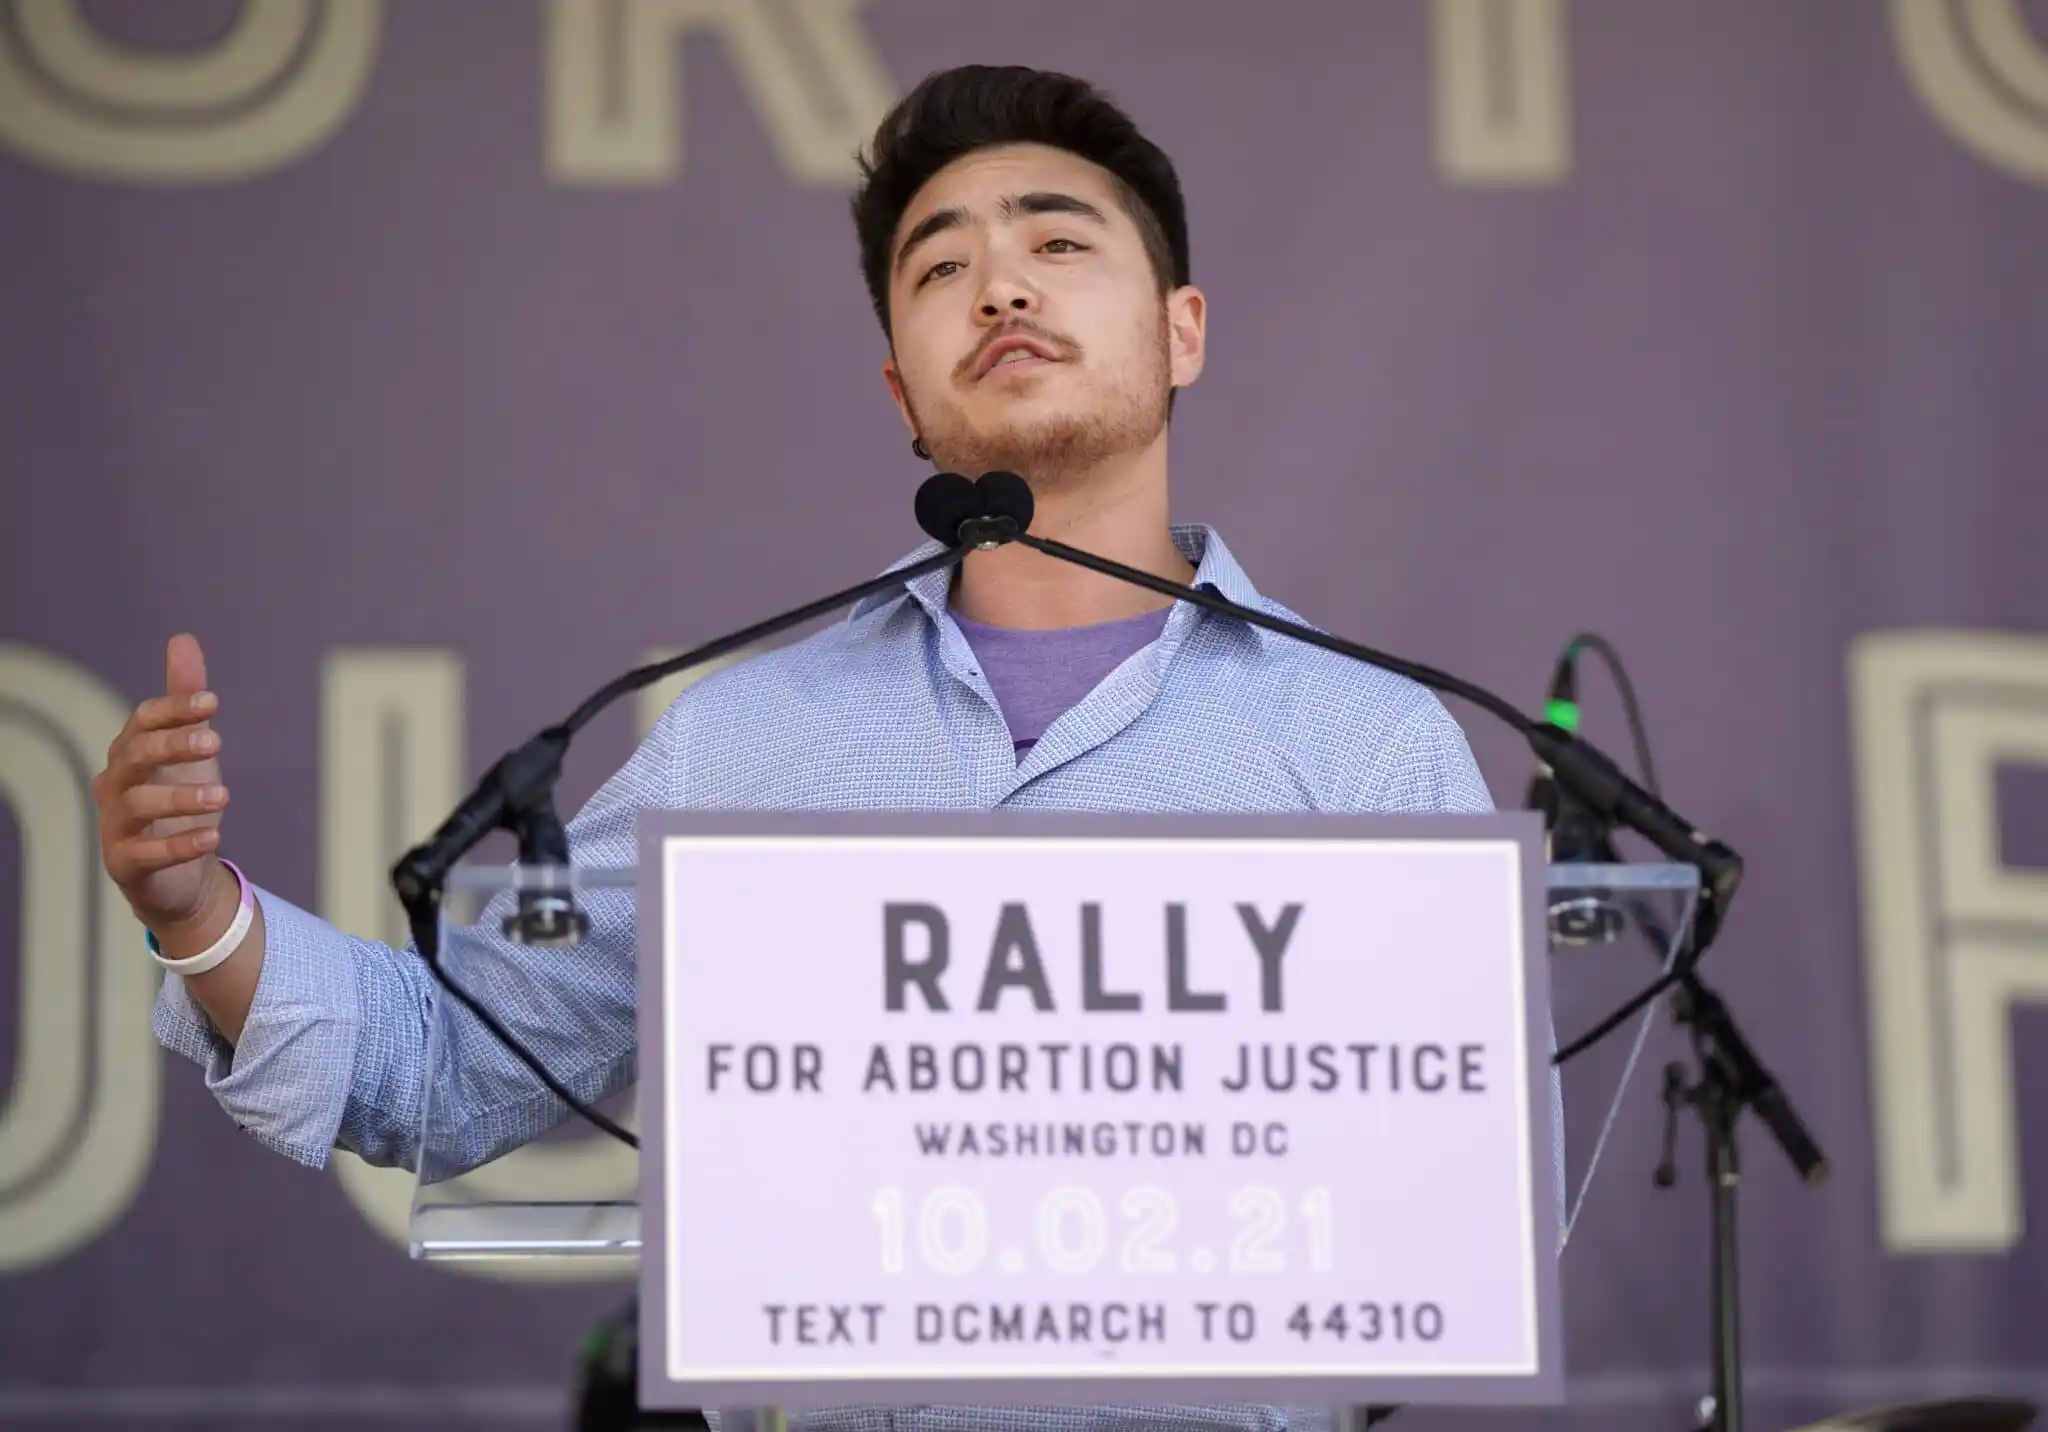 Schuyler Bailar at the Rally For Abortion Justice